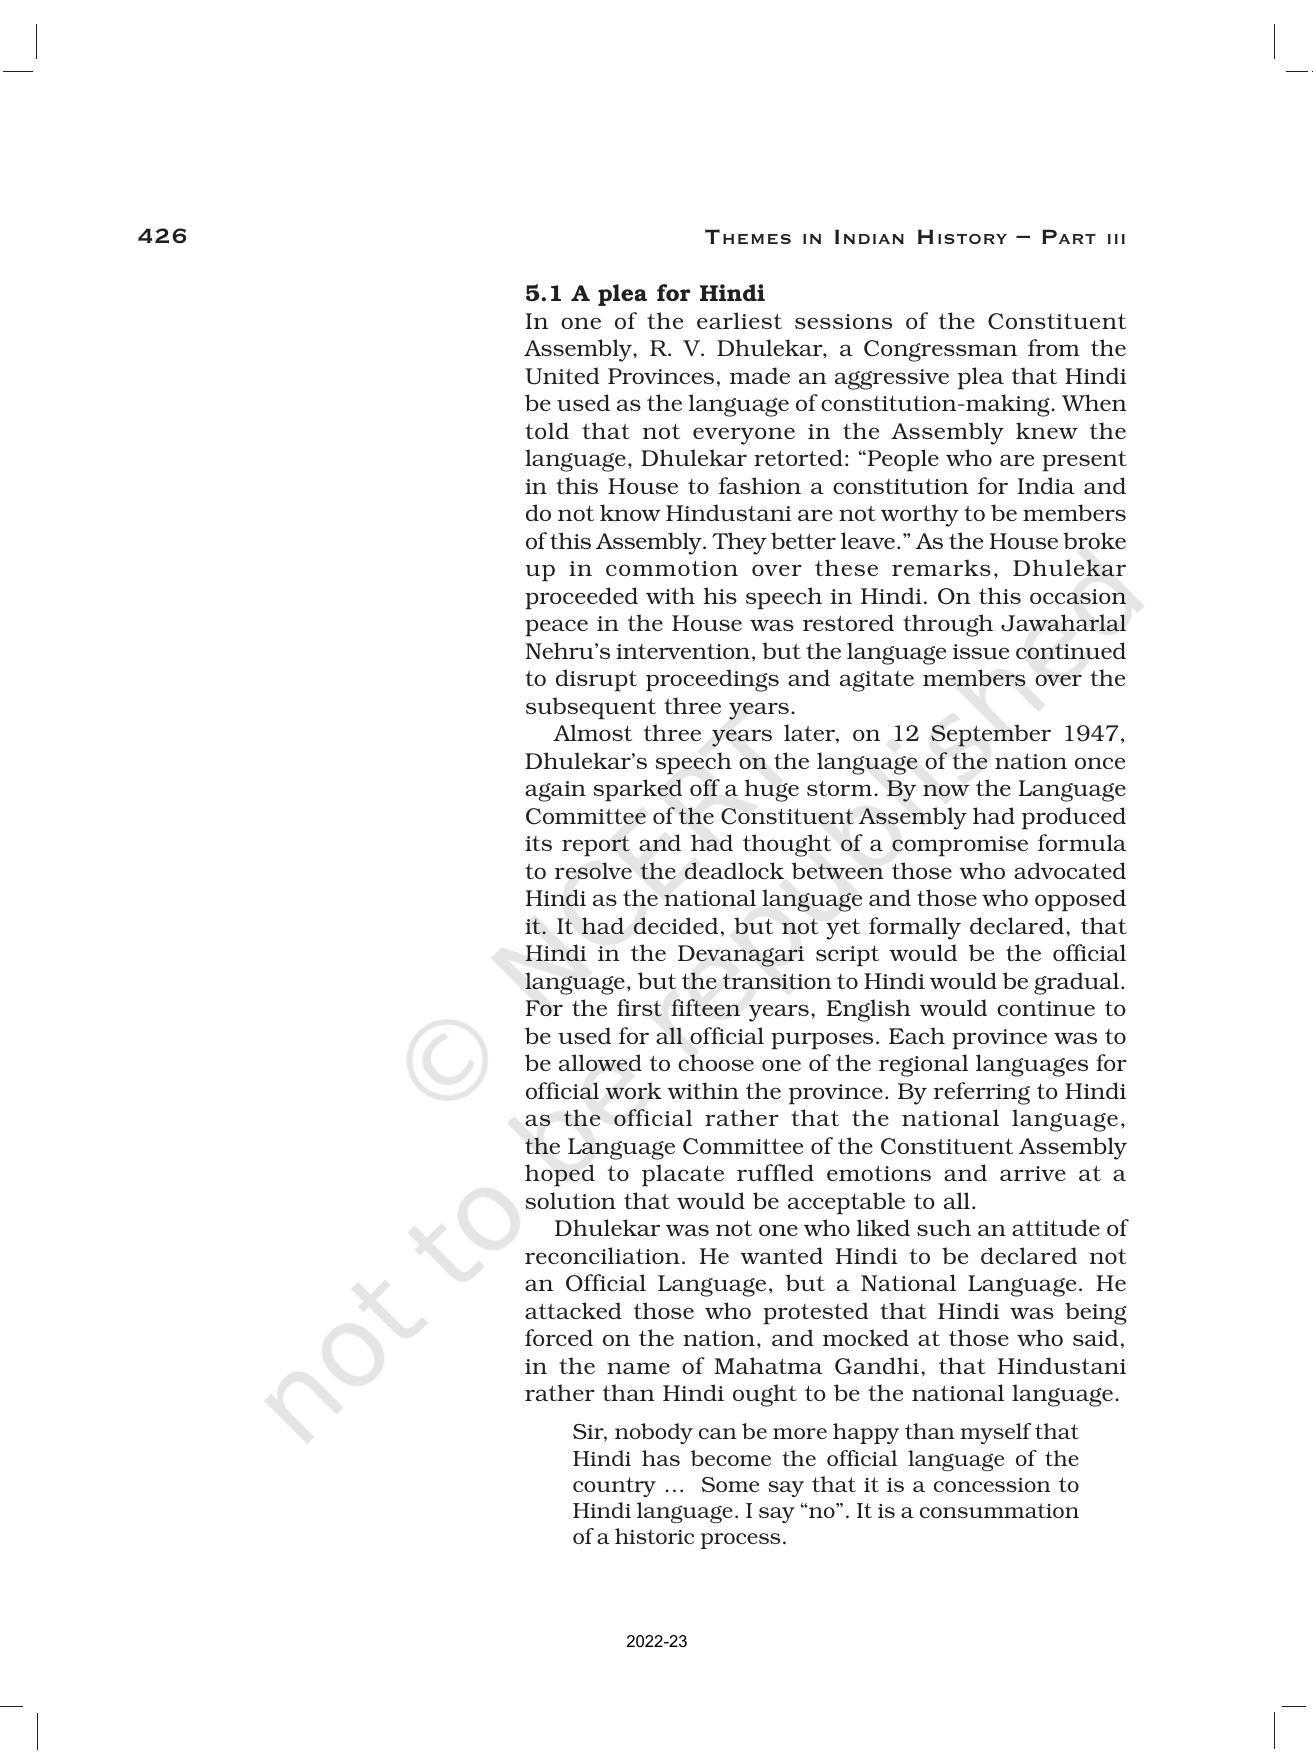 NCERT Book for Class 12 History (Part-III) Chapter 15 Framing and the Constitution - Page 22